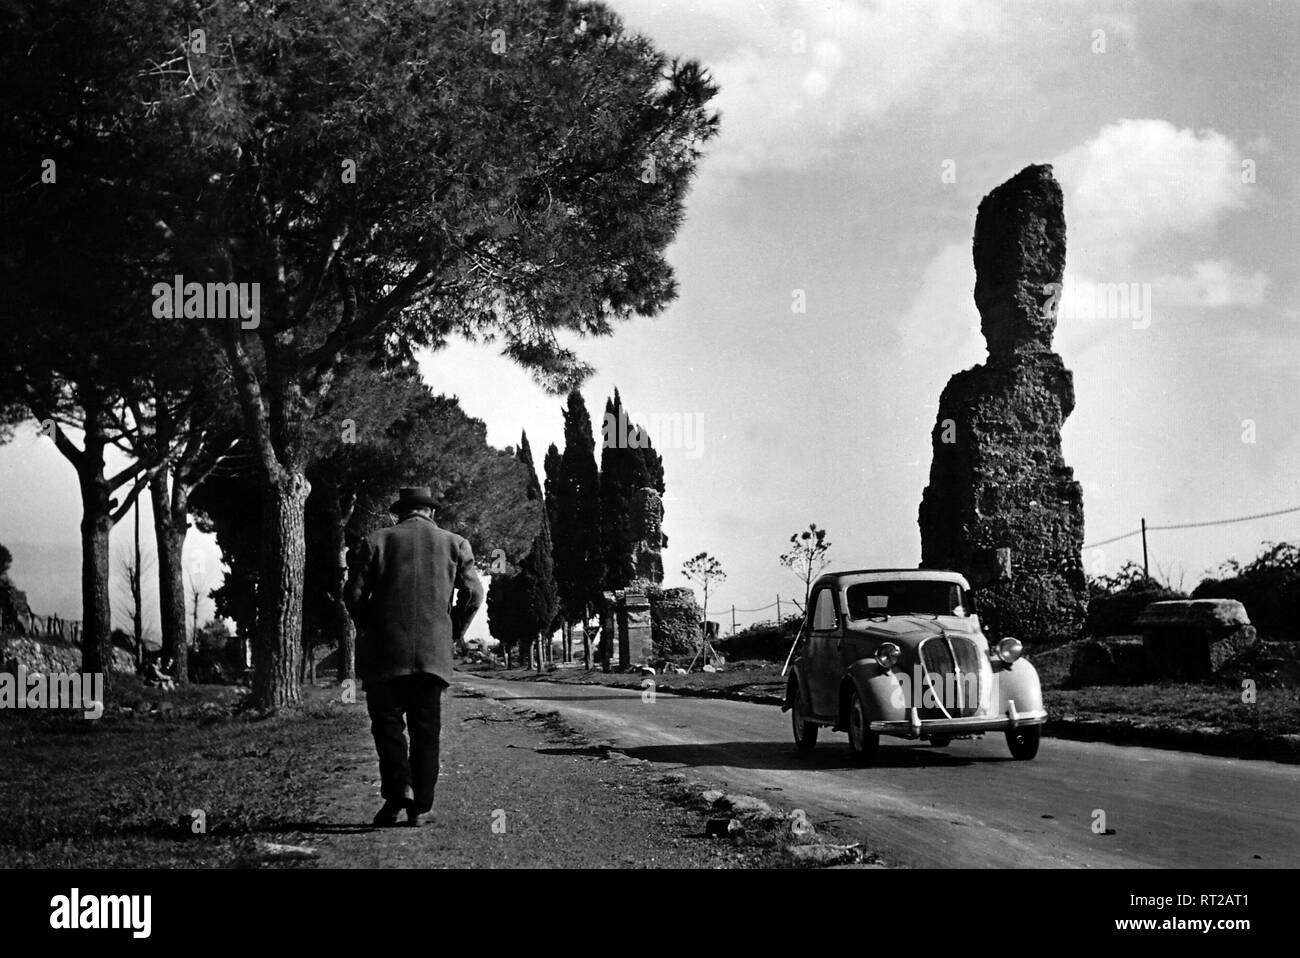 Travel to Rome - Italy in 1950s - Fiat Topolino on the Via Appia Antica near Rome. Auf der Via Appia Antica bei Rom, Italien. Image taken in 1954 by Erich Andres Stock Photo